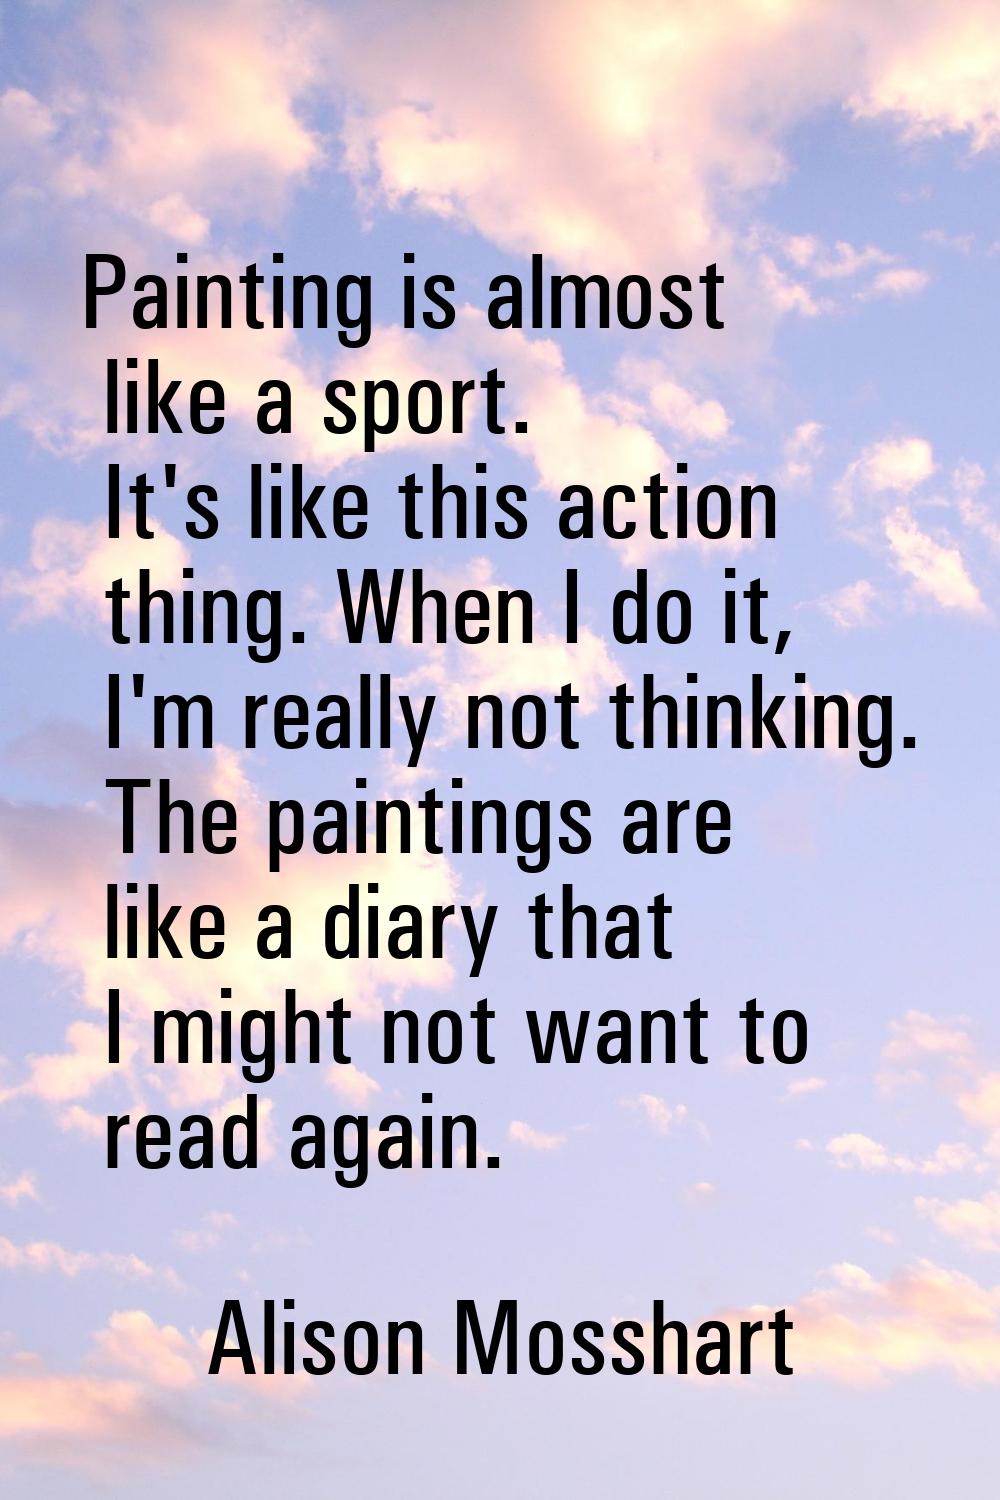 Painting is almost like a sport. It's like this action thing. When I do it, I'm really not thinking